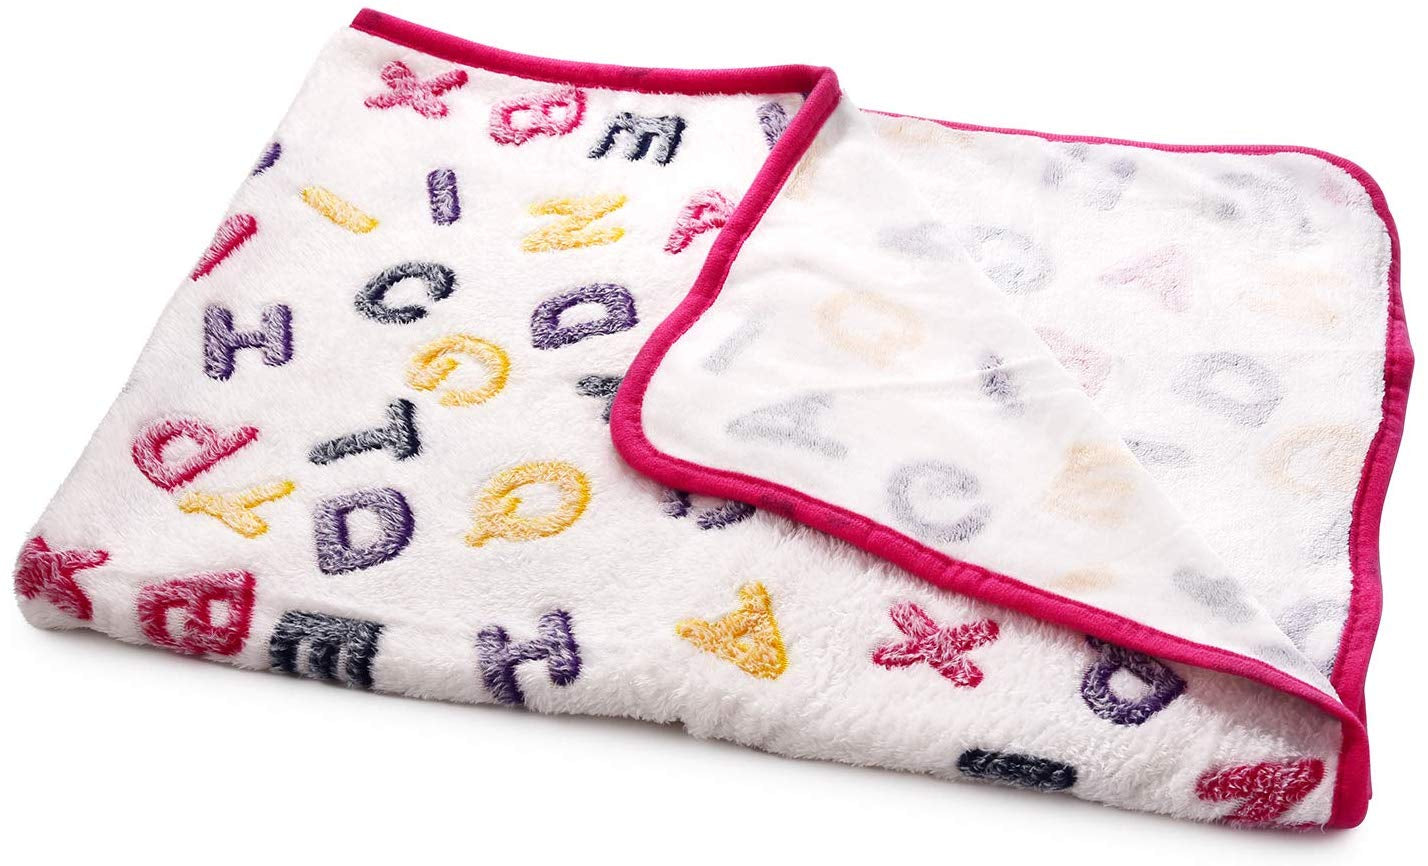 LUXMO 2 Pack Dog Cat Puppy Blanket Warm Soft Pet Blankets Sleep Mat Bed Cover with Paw Print for Dog Cat Puppy Kitten and Other Small Animals